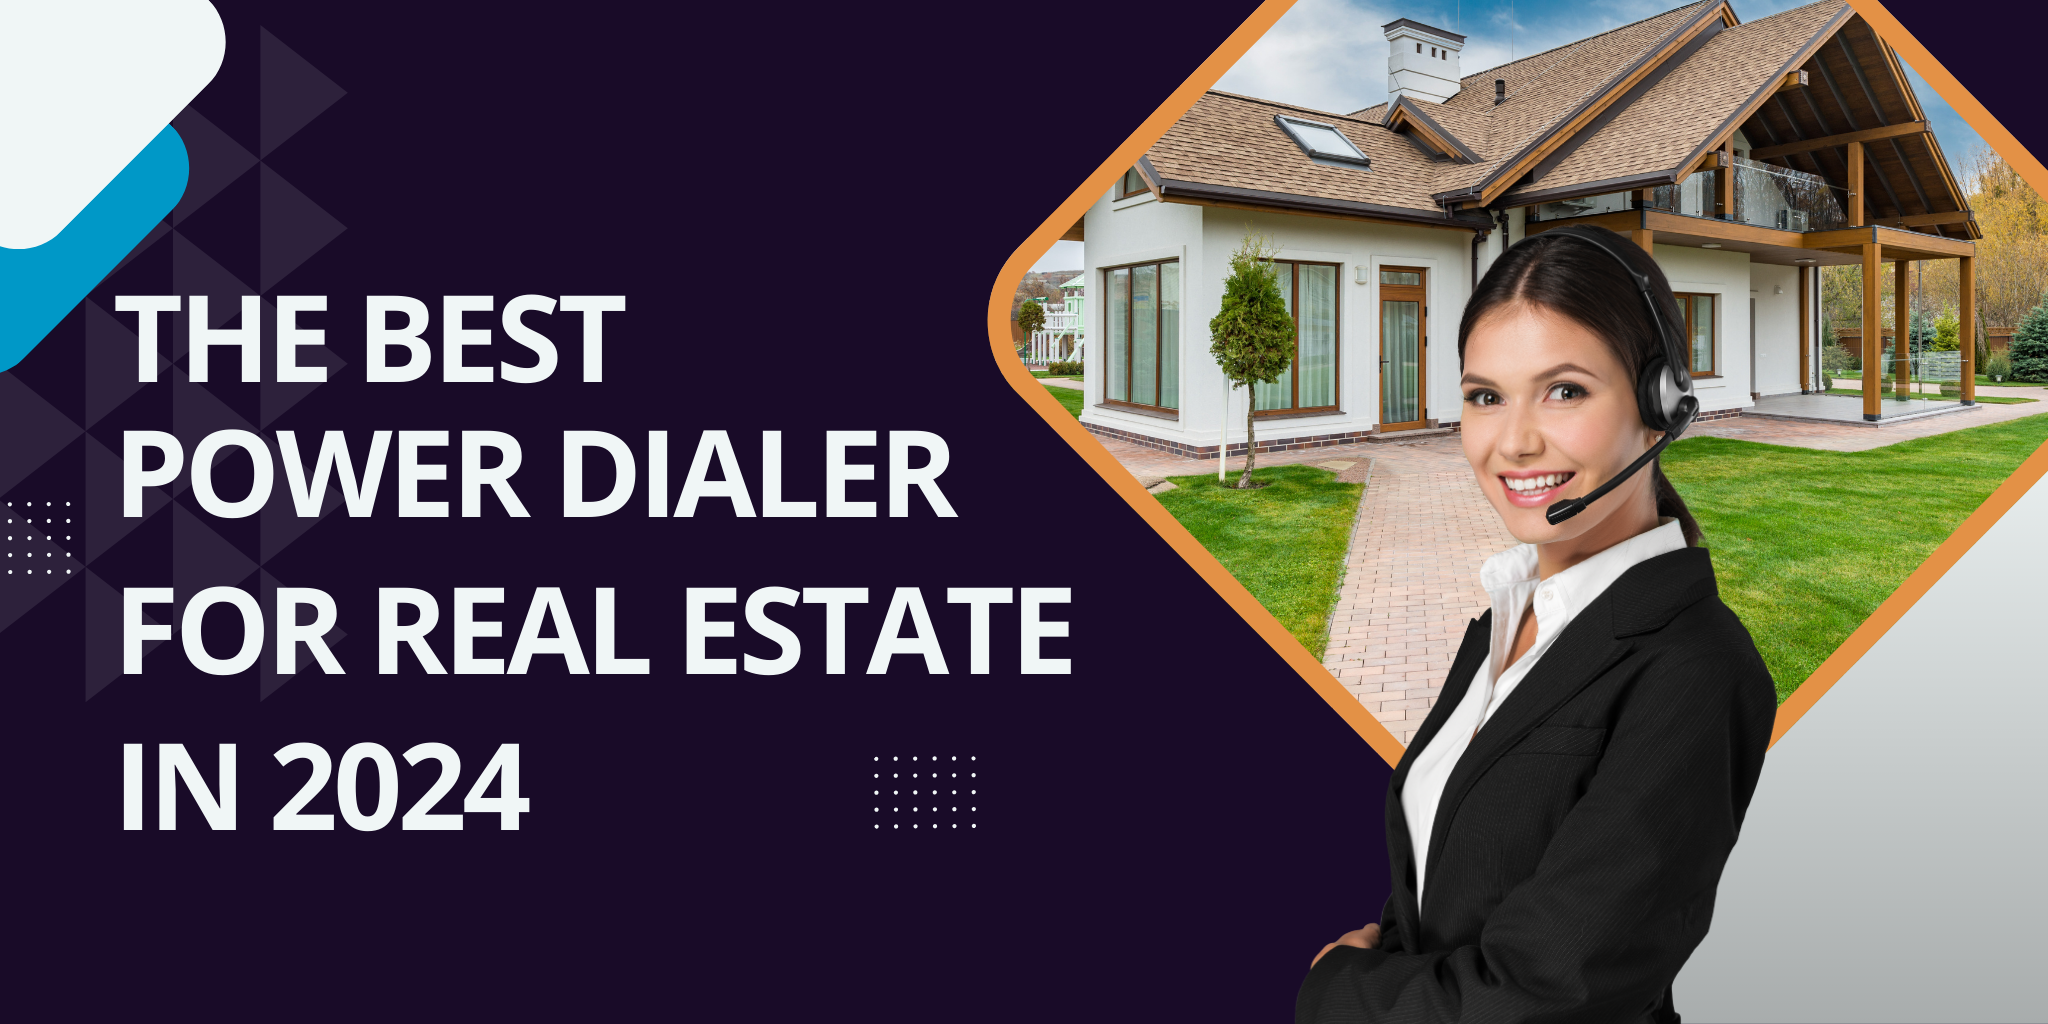 Best Power Dialer for Real Estate Agents in 2024 | Telephones for business